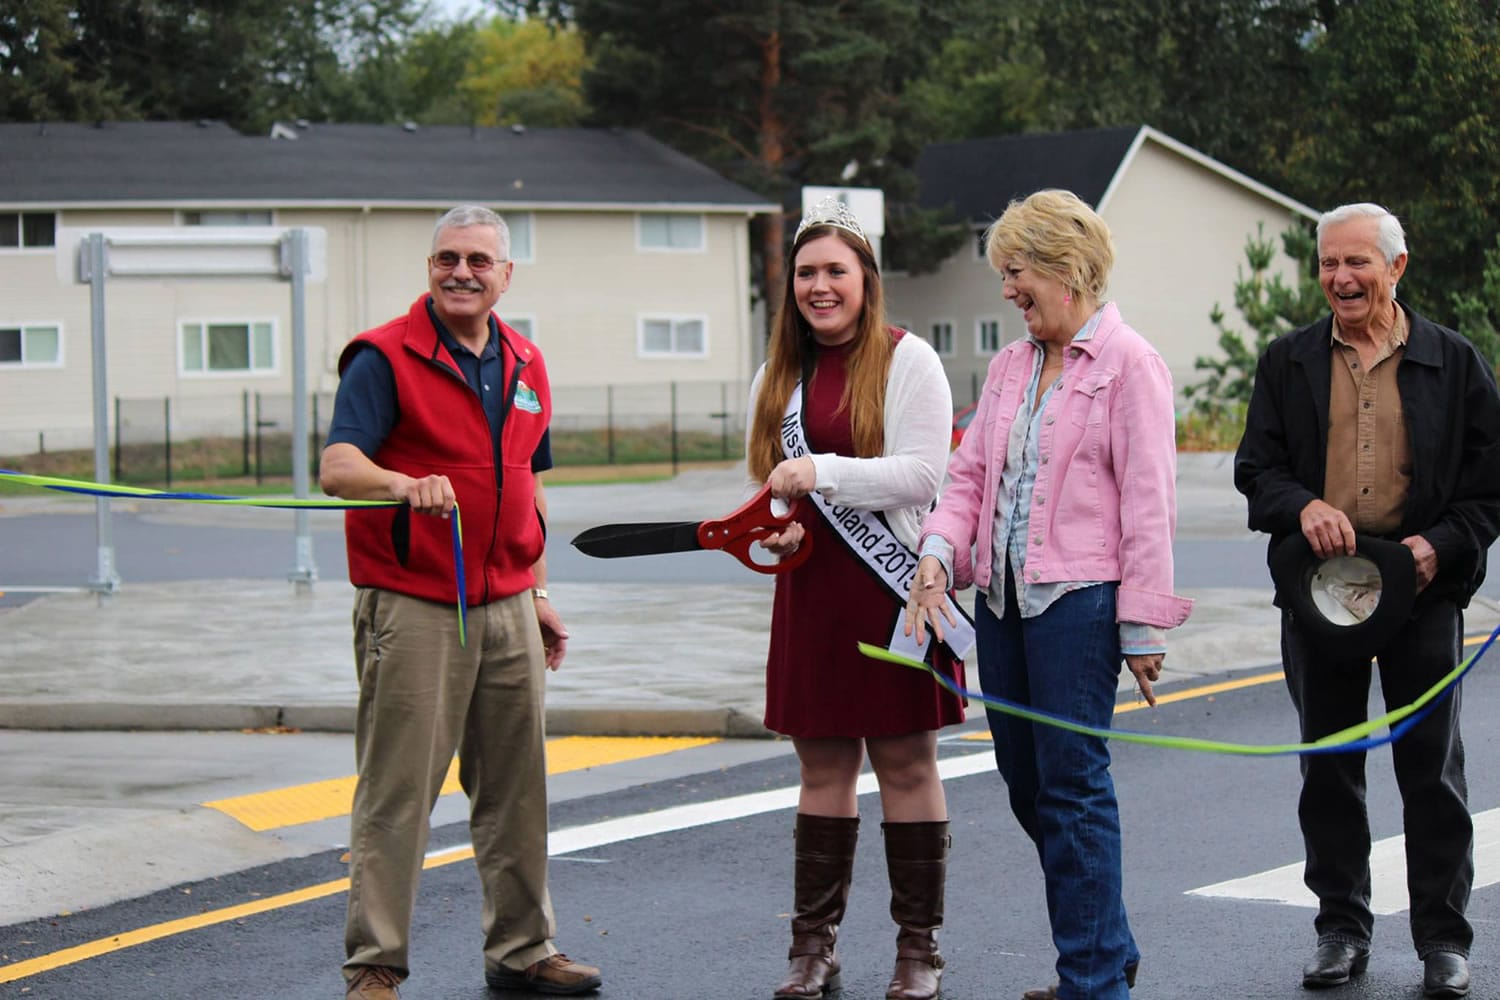 Woodland: Woodland Mayor Grover Laseke, from left, Miss Woodland 2015 Taylor Vossen and Woodland councilors Susan Humbyrd and Marshall Allen are a ribbon-cutting ceremony to announce the completion of improvements to the state Highway 503 and East Scott Avenue roundabout intersection.